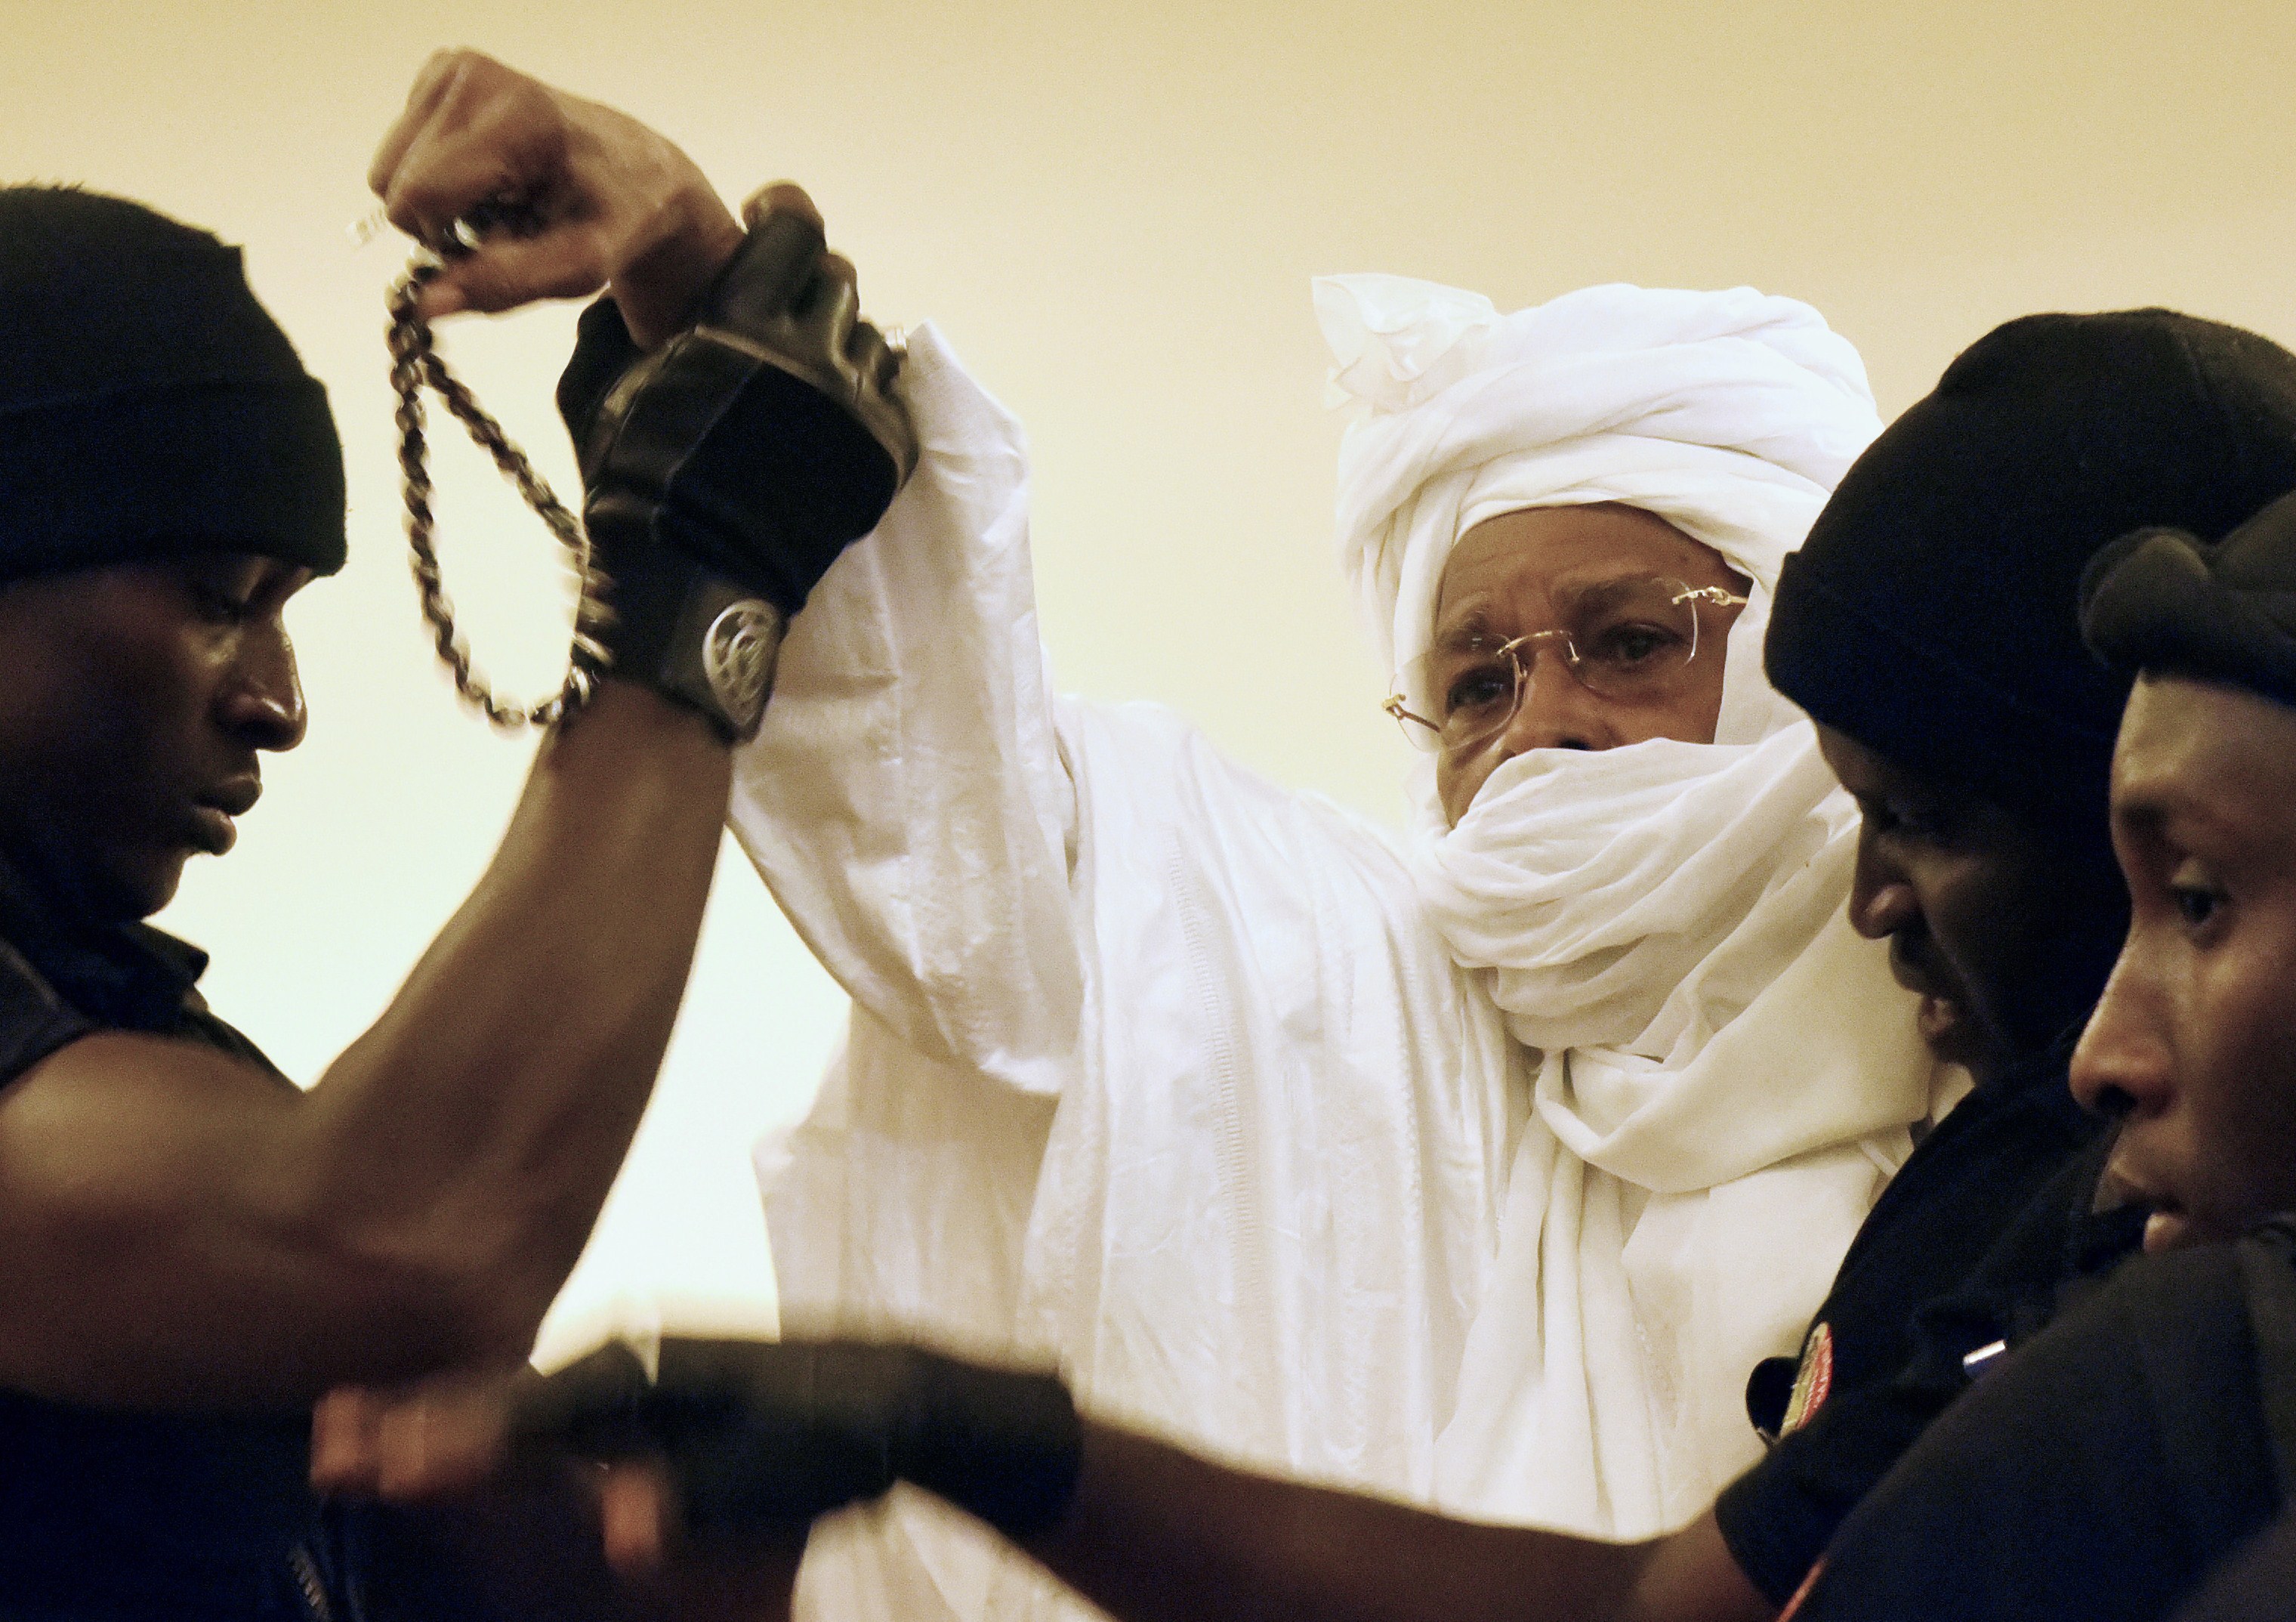 Former Chadian dictator Hissene Habre is escorted by prison guards into the courtroom for the first proceedings of his trial by the Extraordinary African Chambers in Dakar on July 20, 2015. (SEYLLOU/AFP/Getty Images)